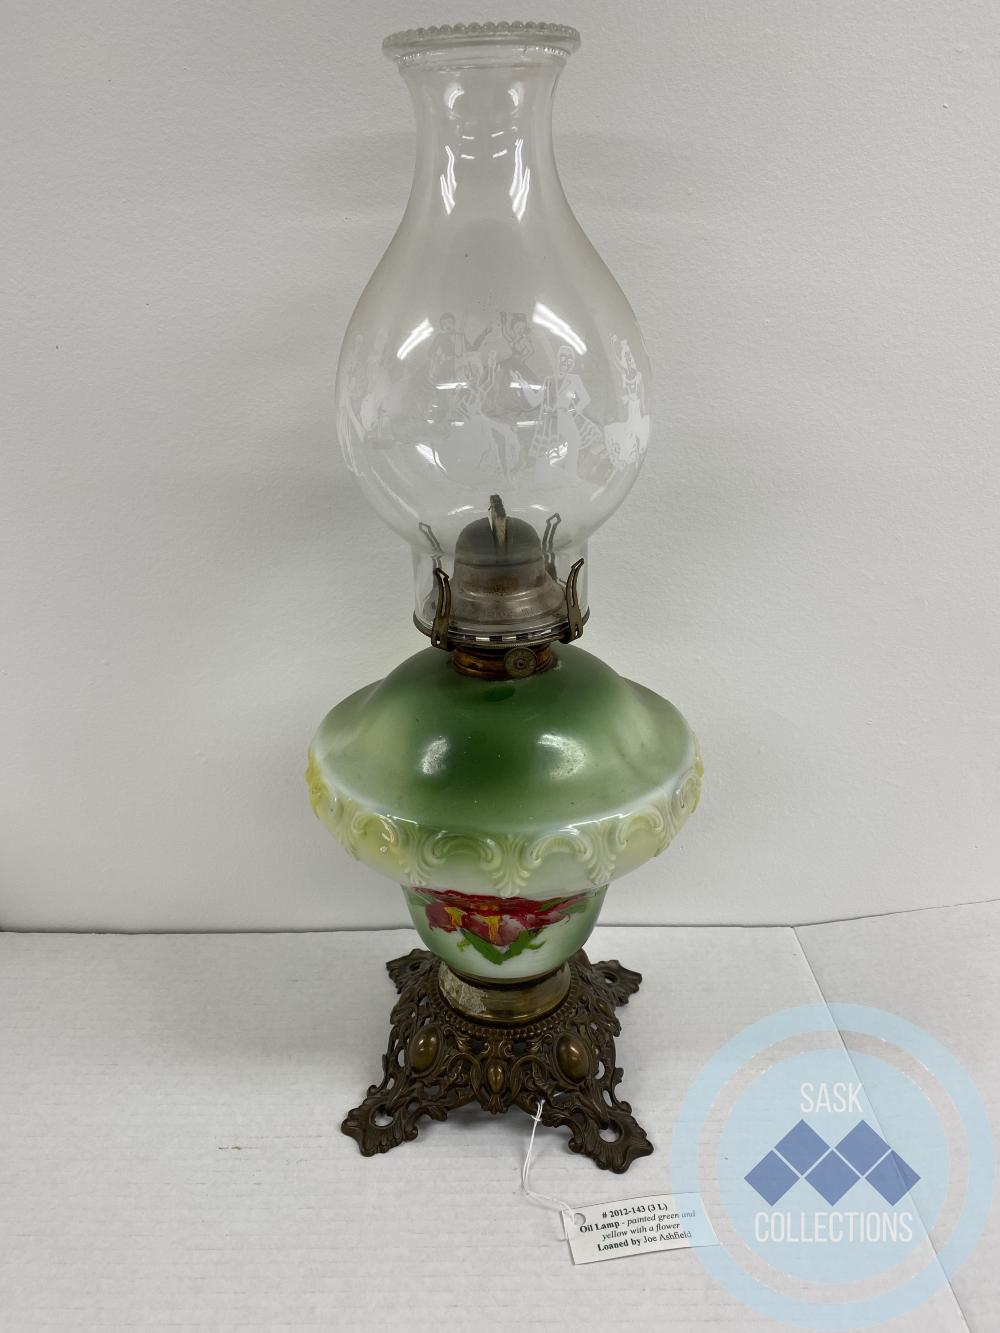 Oil lamp - green and yellow